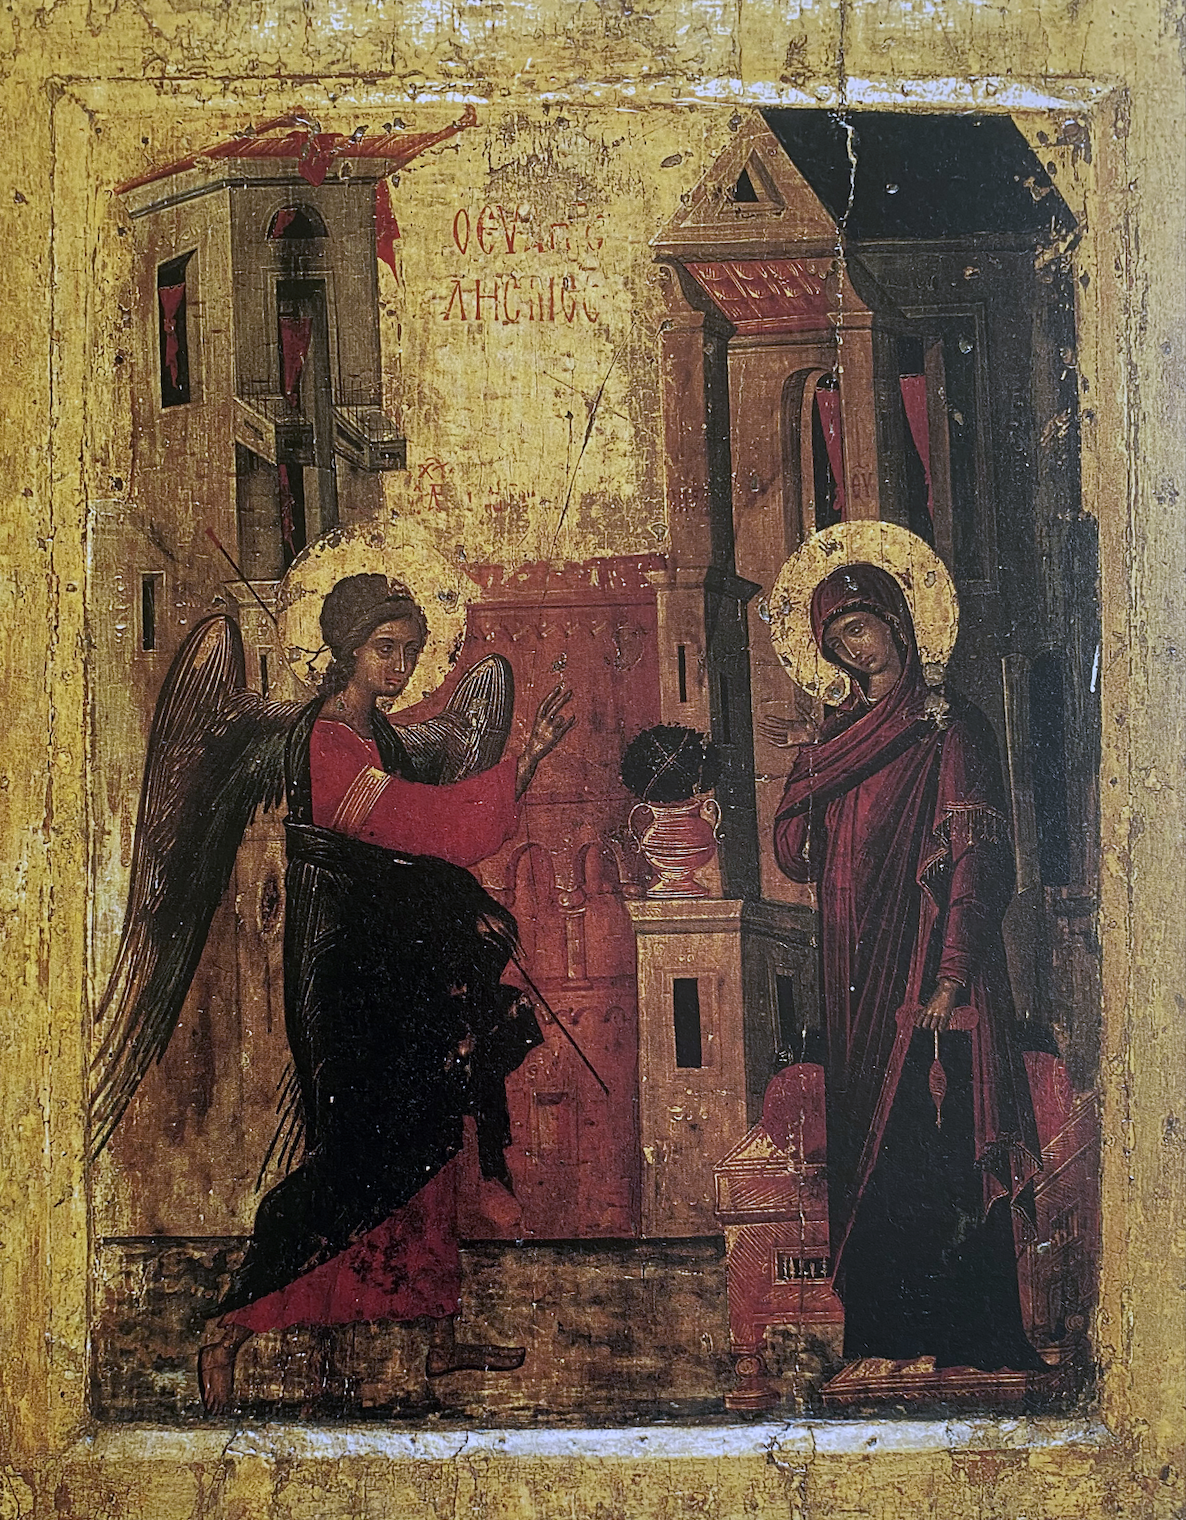 Annunciation, icon from the Krušedol, unknown Greek painter, beginning of the 16th century (source: N. Piperski)